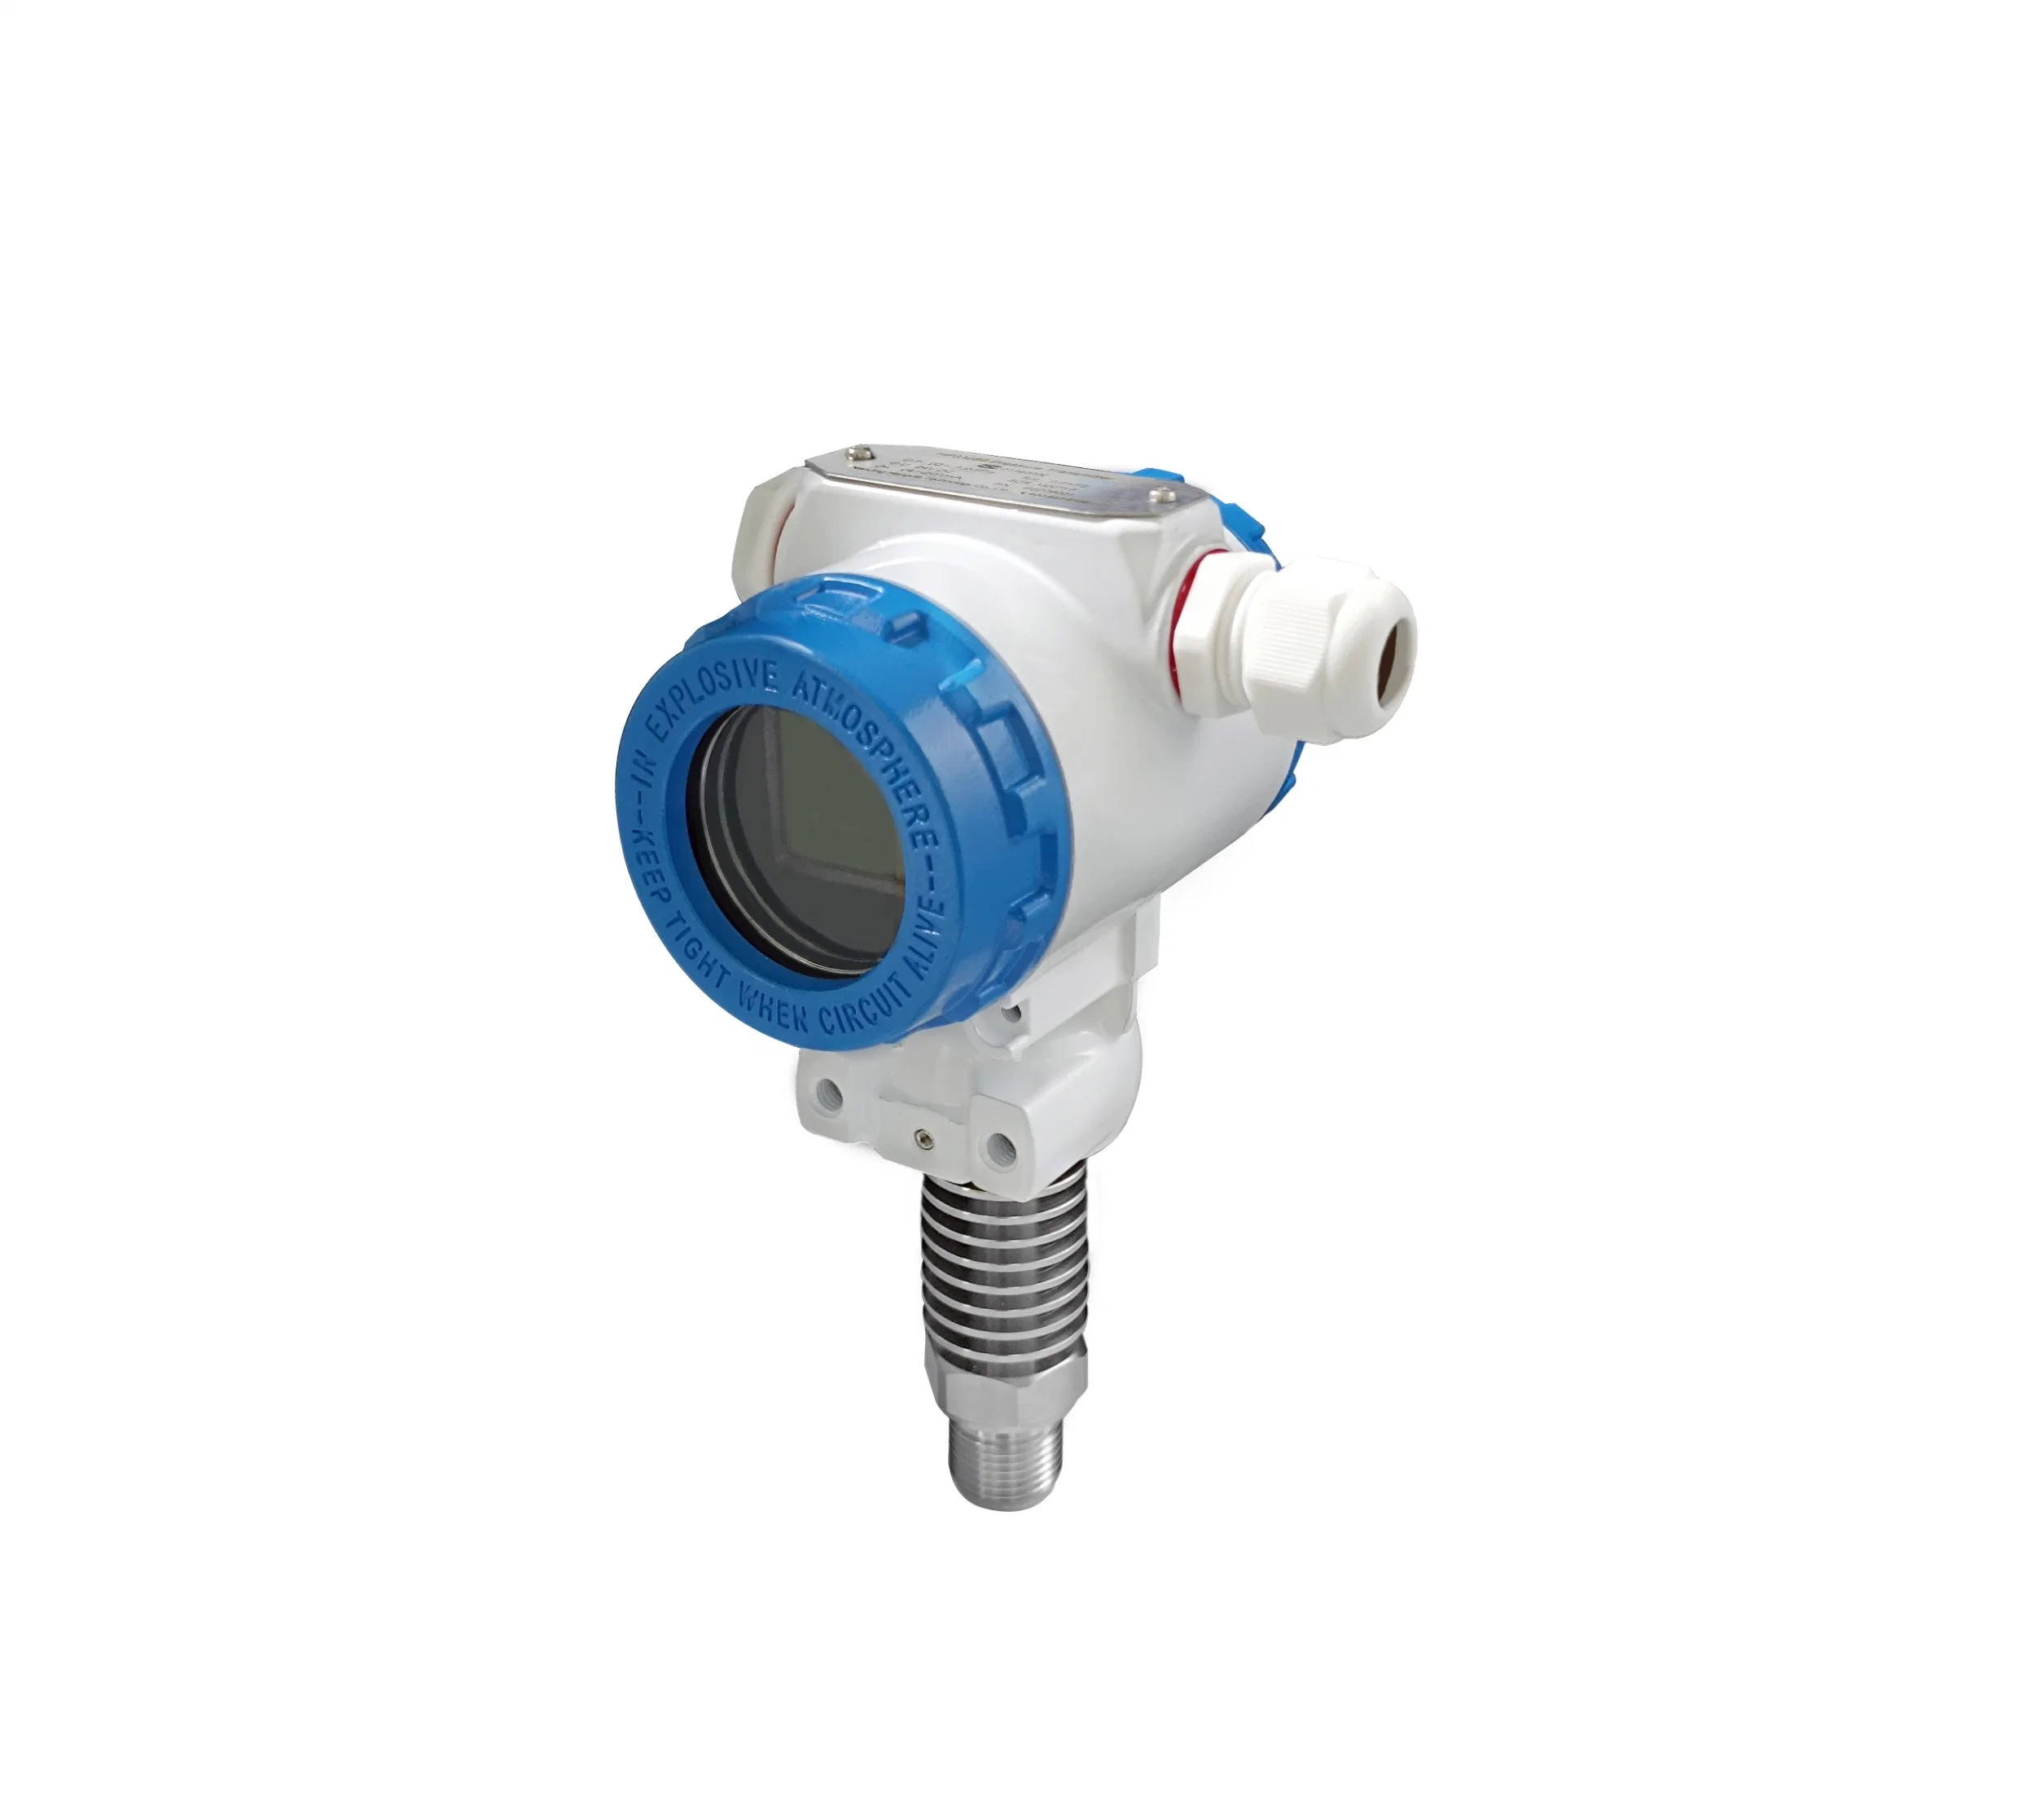 Water and Dust Proof High Temperature Protective Pressure Transducer